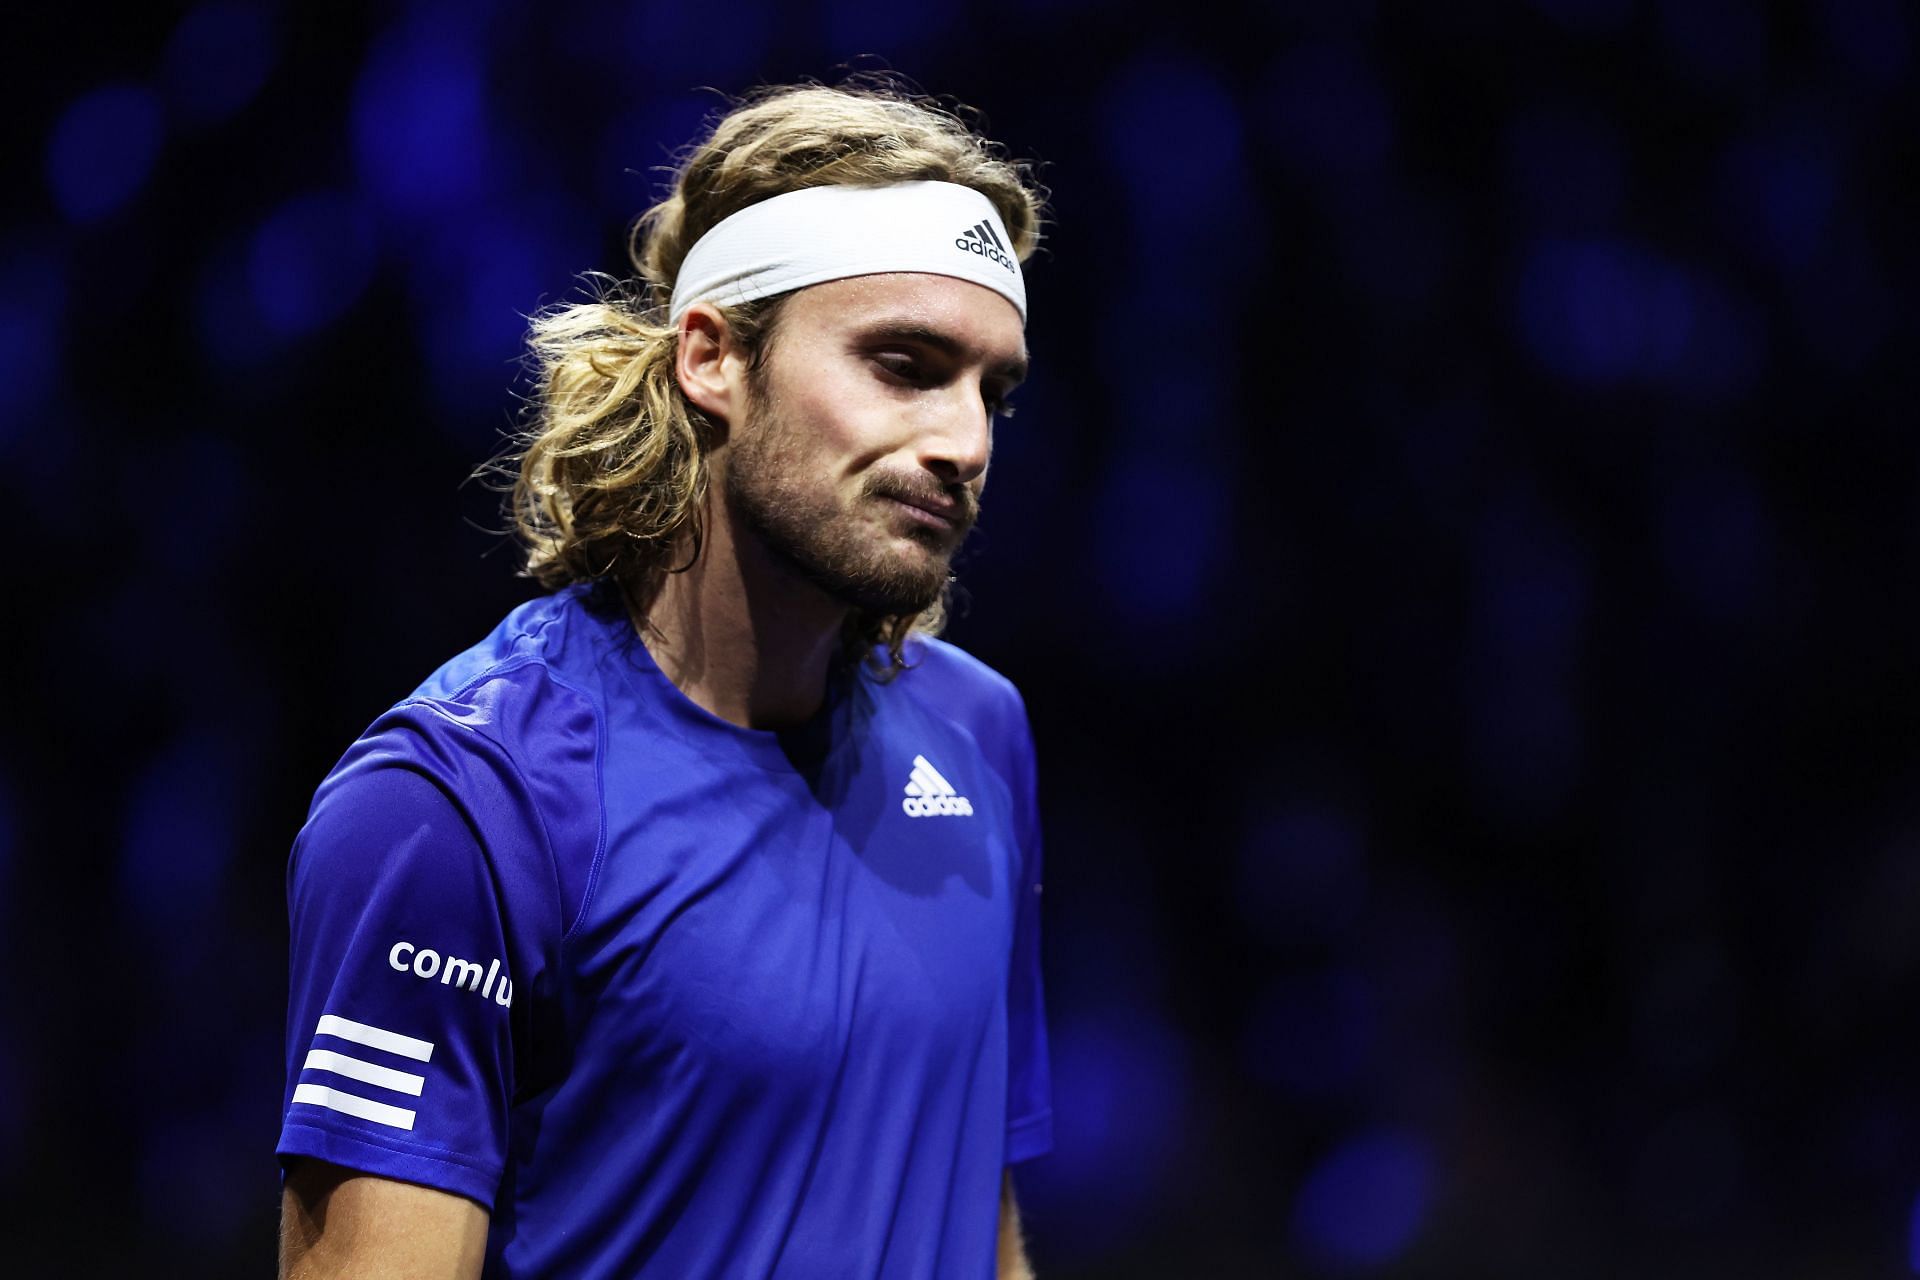 Stefanos Tsitsipas pictured at the 2022 Laver Cup.